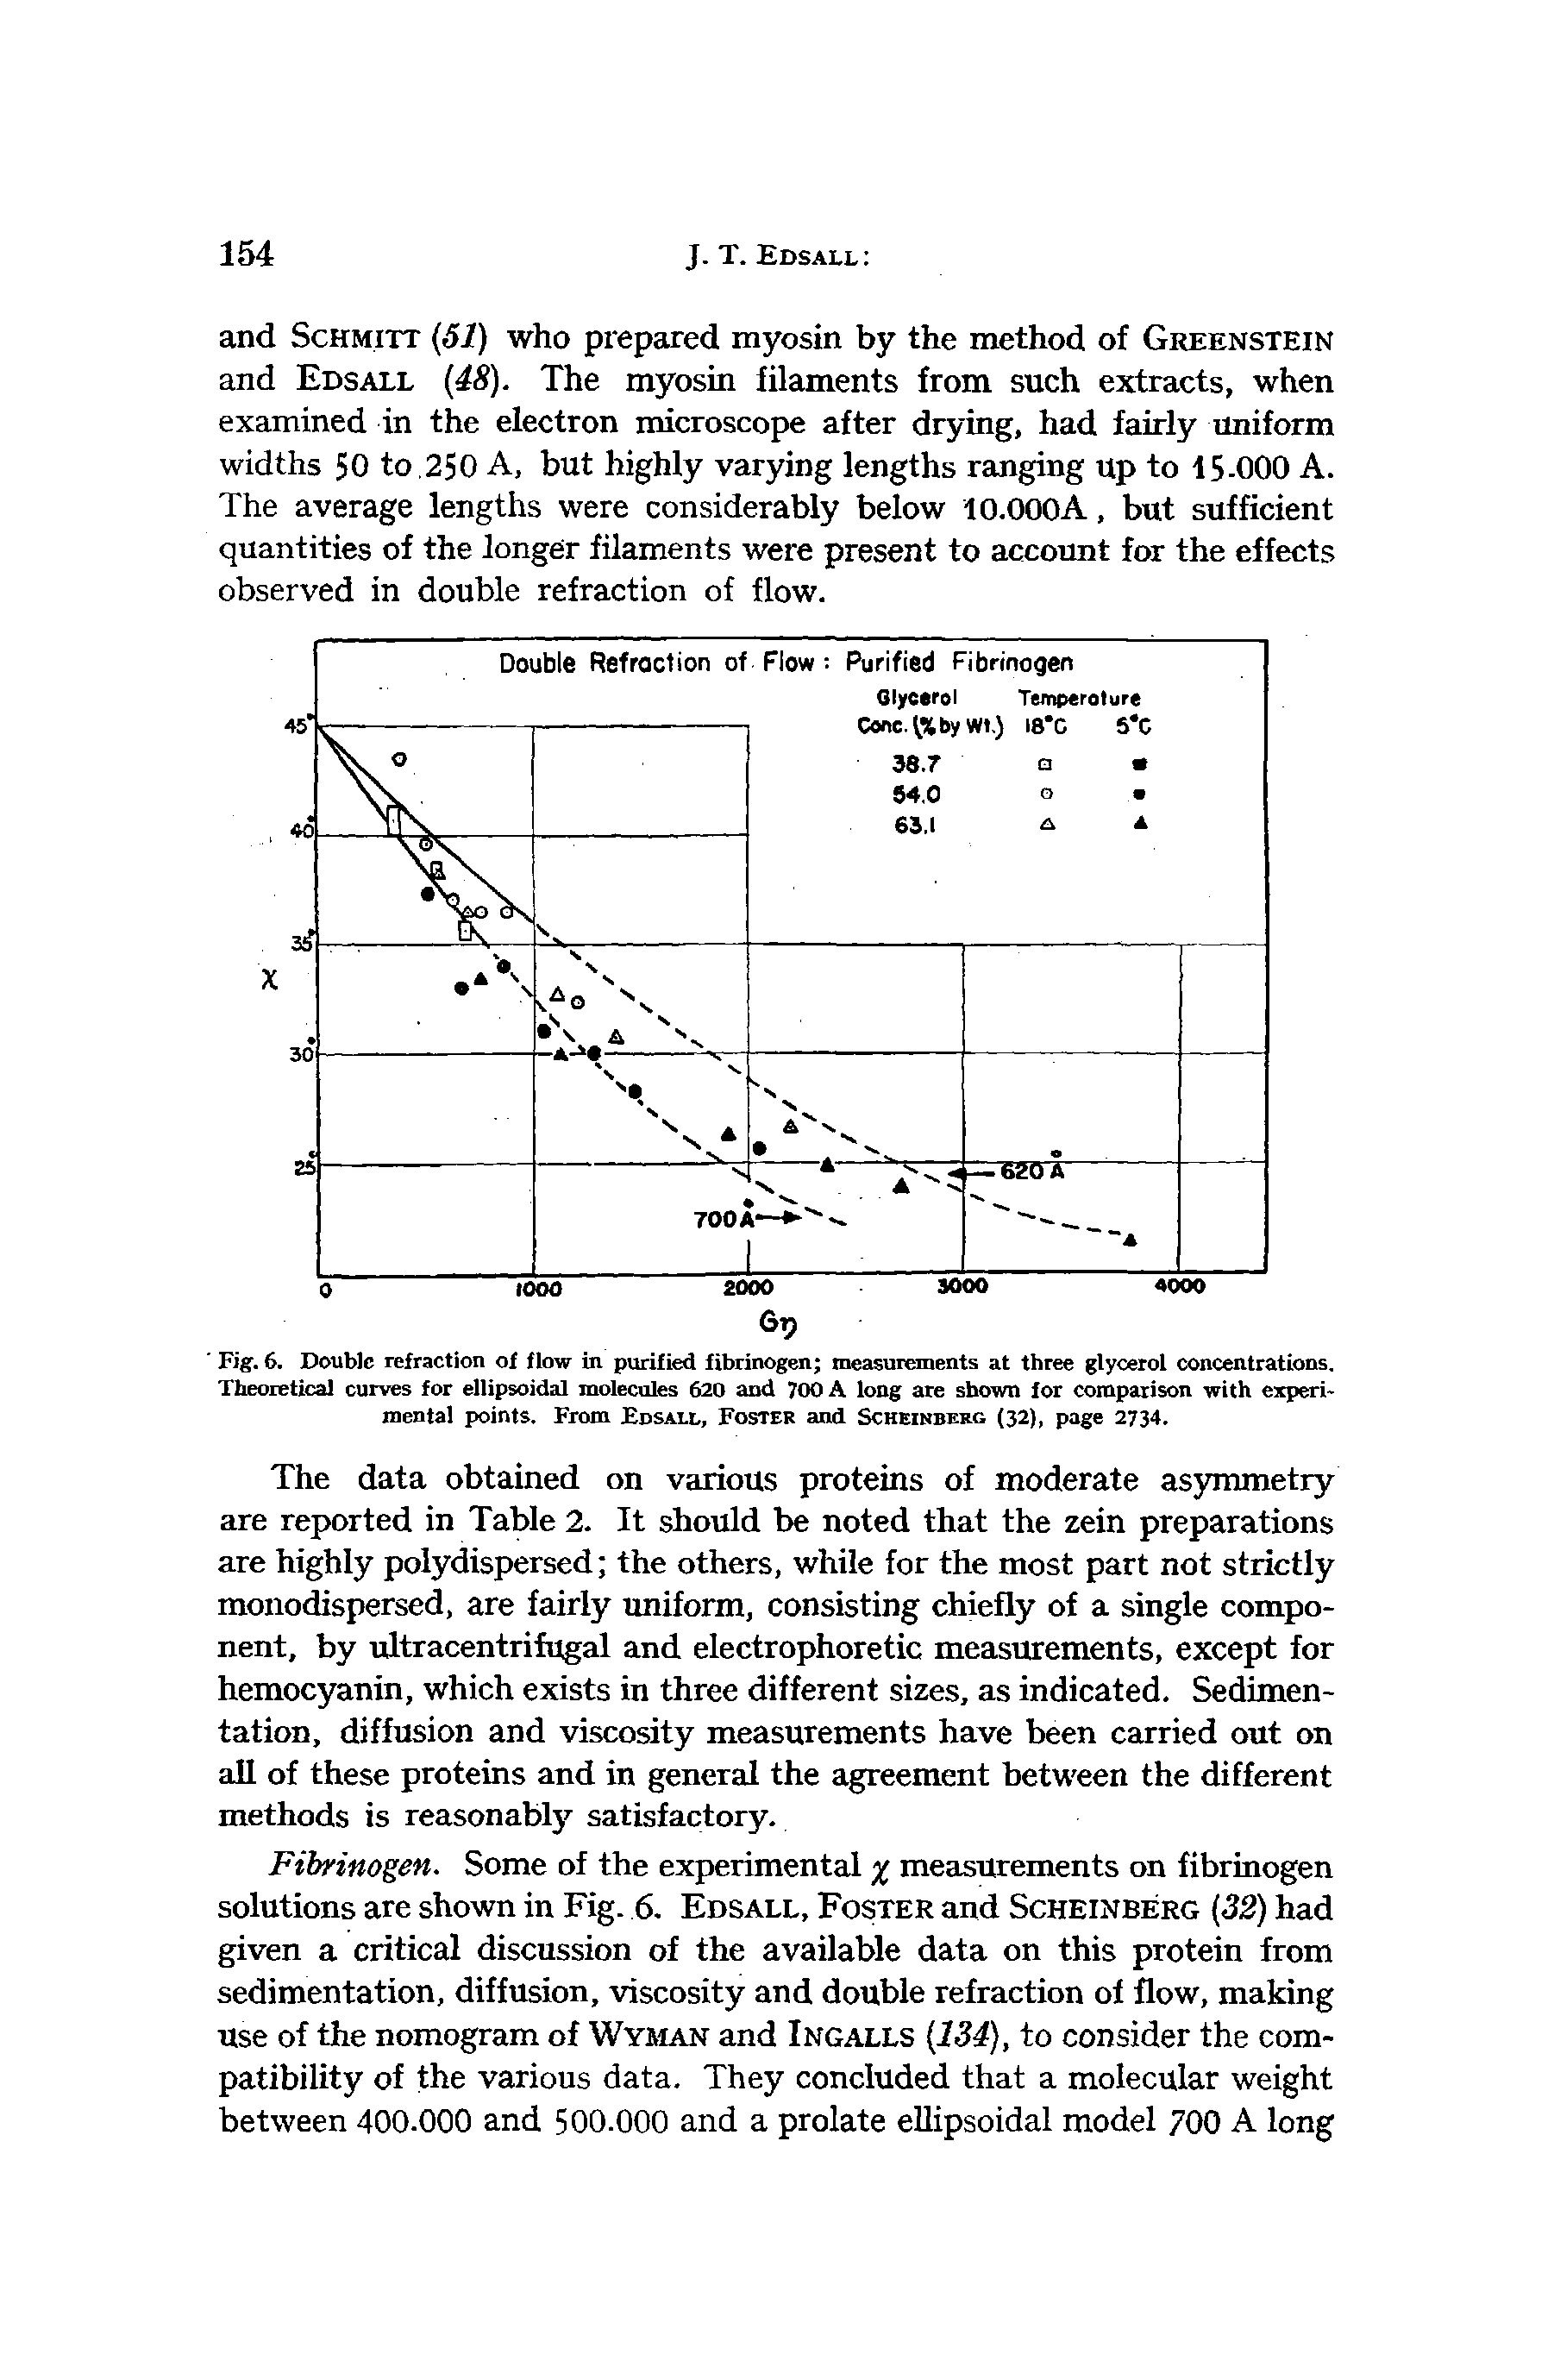 Fig. 6. Double refraction of flow in purified fibrinogen measurements at three glycerol concentrations. Theoretical curves for ellipsoidal molecules 620 and 700 A long are shown for comparison with experimental points. From Edsall, Foster and Sckeinberg (32), page 2734.